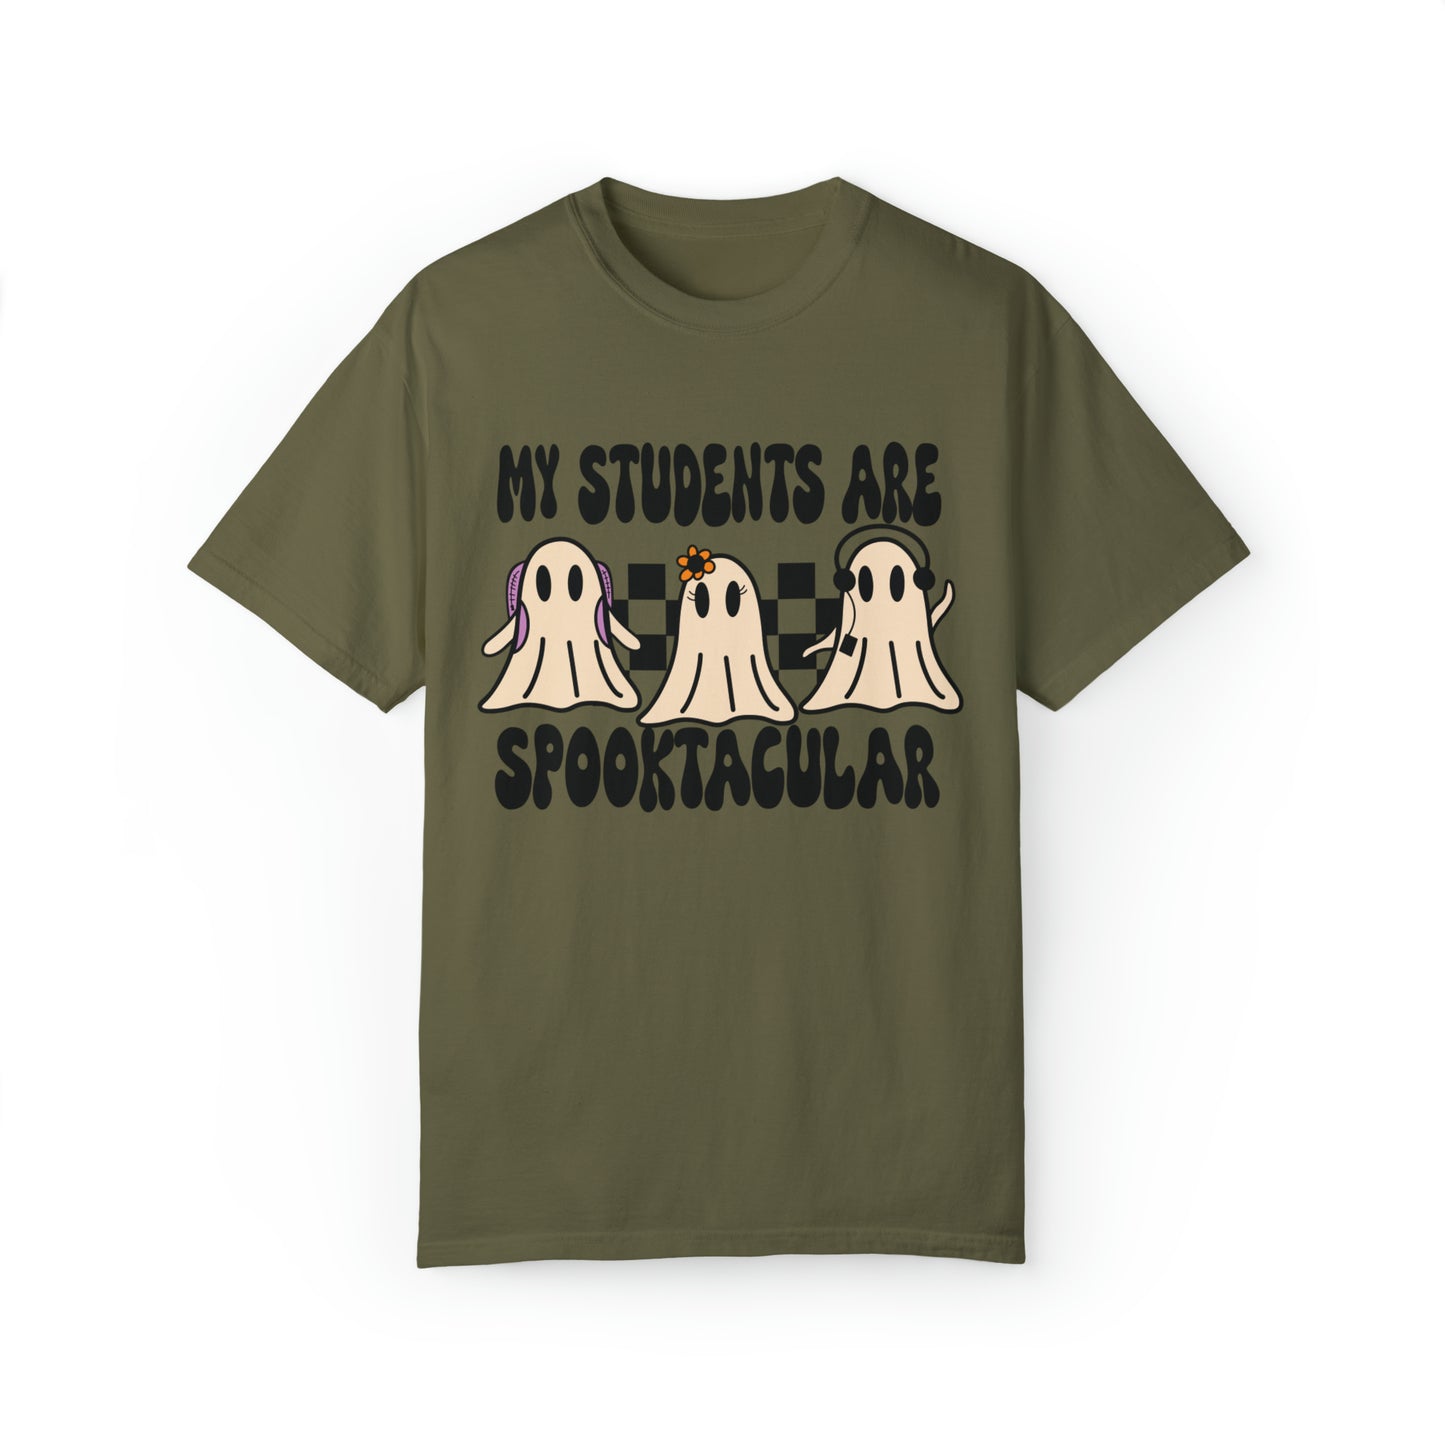 My Students are Spooktacular Comfort Colors Short Sleeve Tee